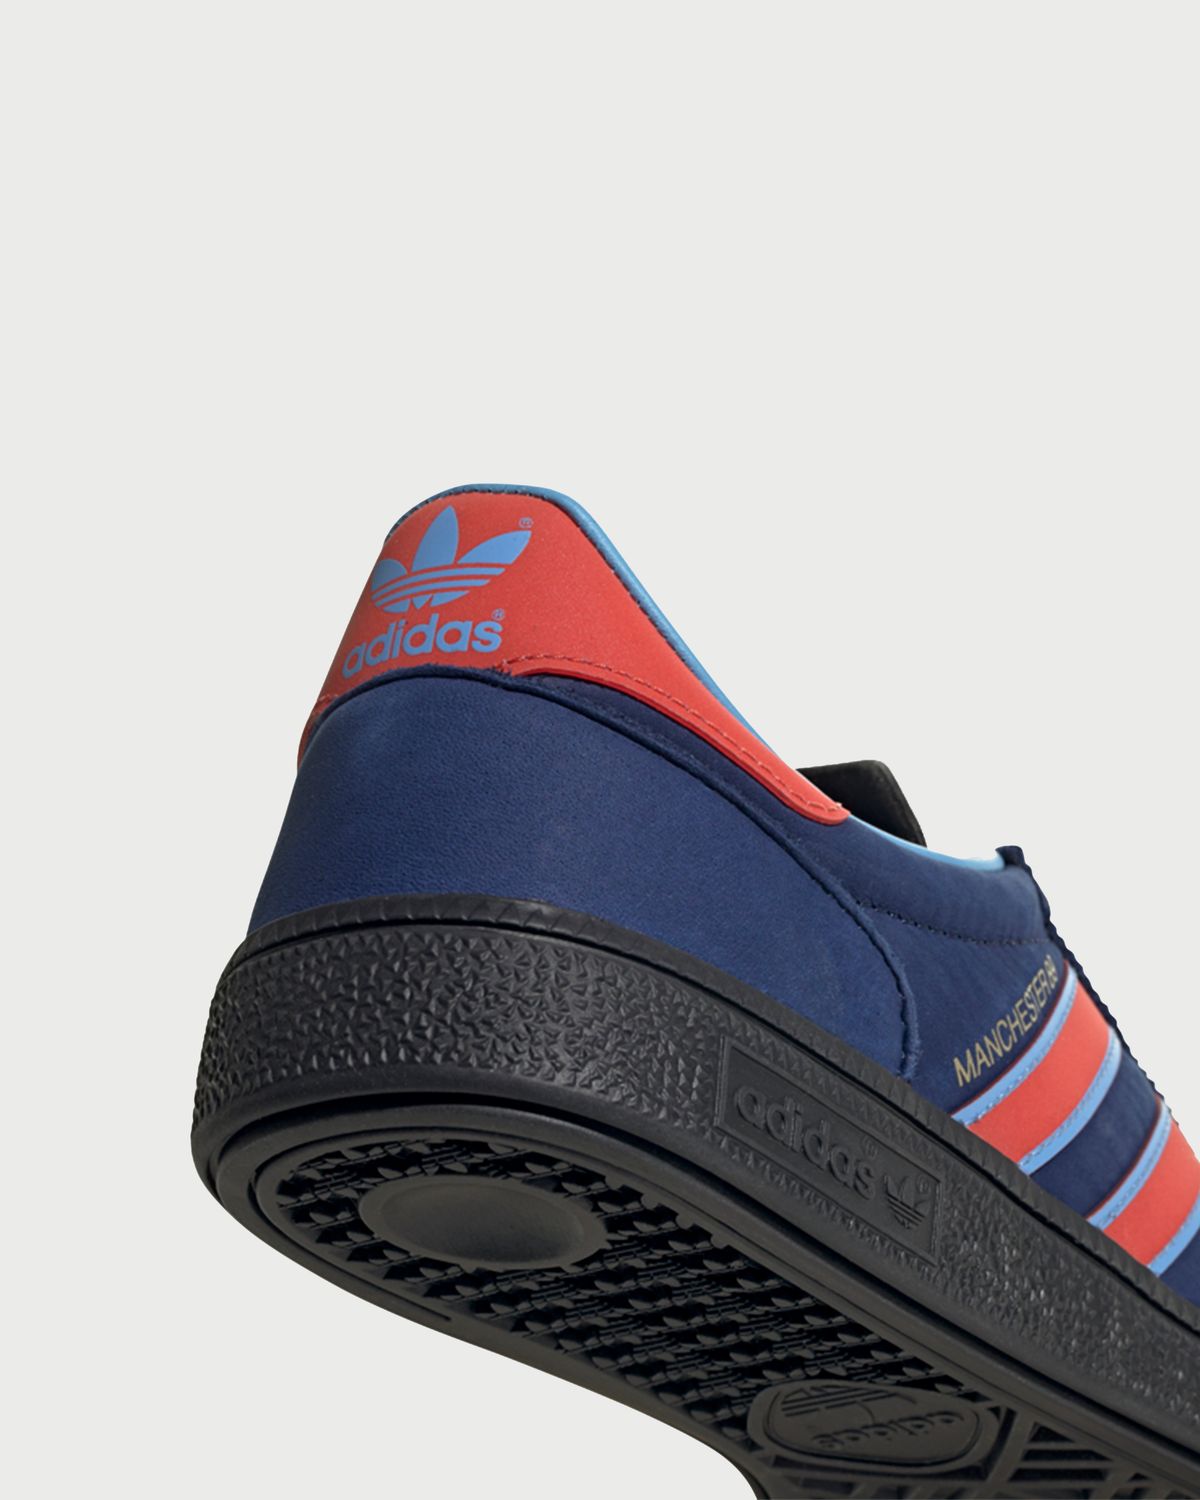 Adidas – Spezial Manchester 89 Trainer Navy - Low Top Sneakers - Blue - Image 4